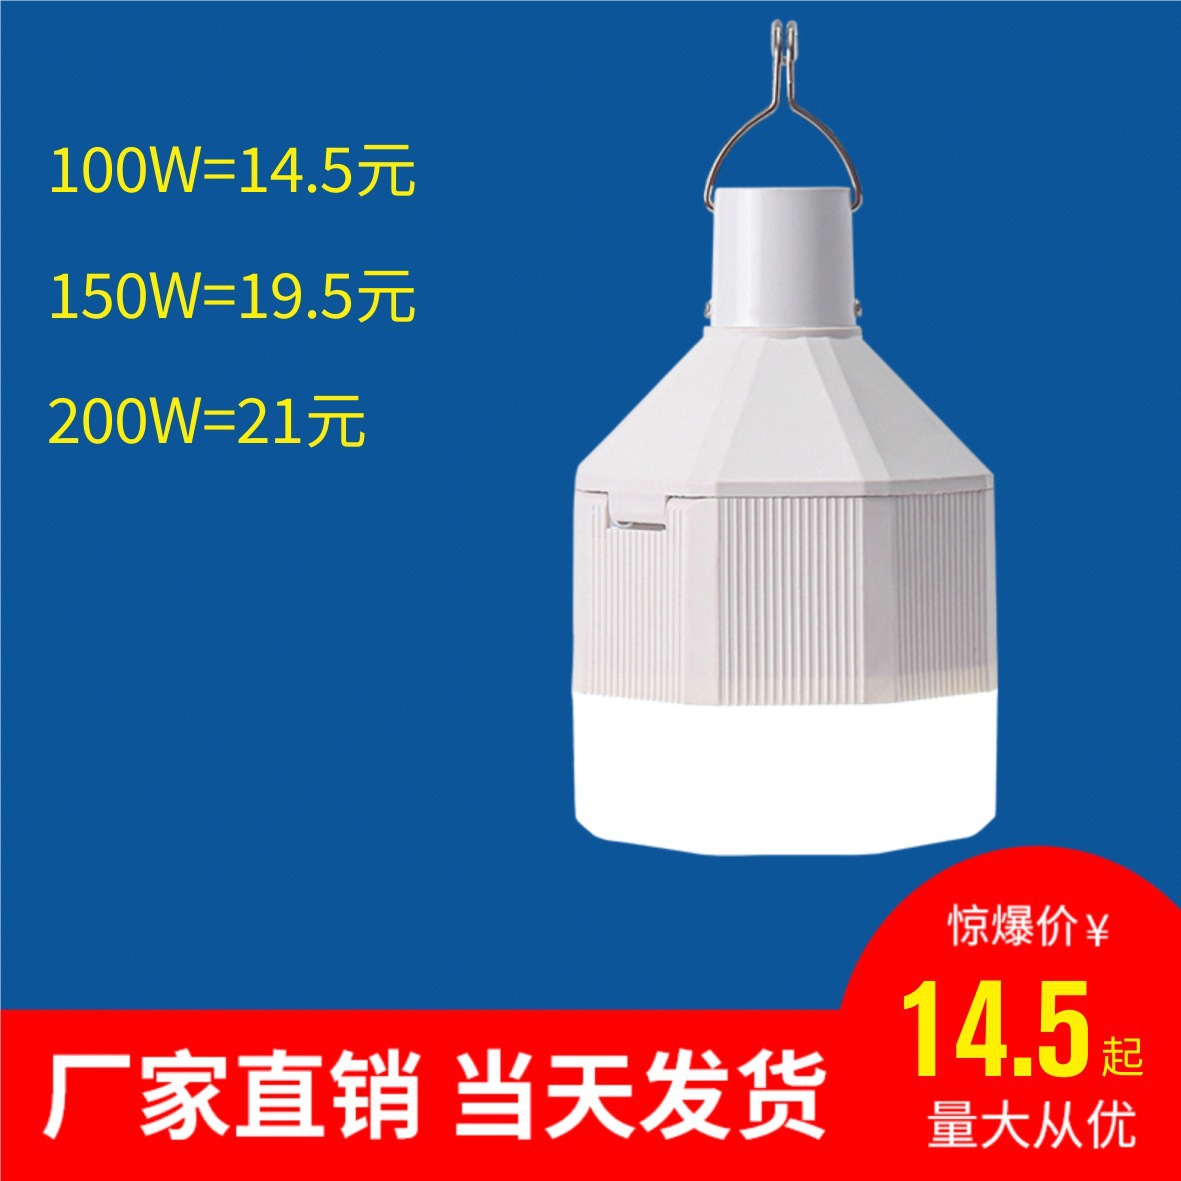 Led Emergency Light Usb Outdoor Charging Tent Camping Bulb Wholesale Night Market Stall Emergency Household Bulb Light